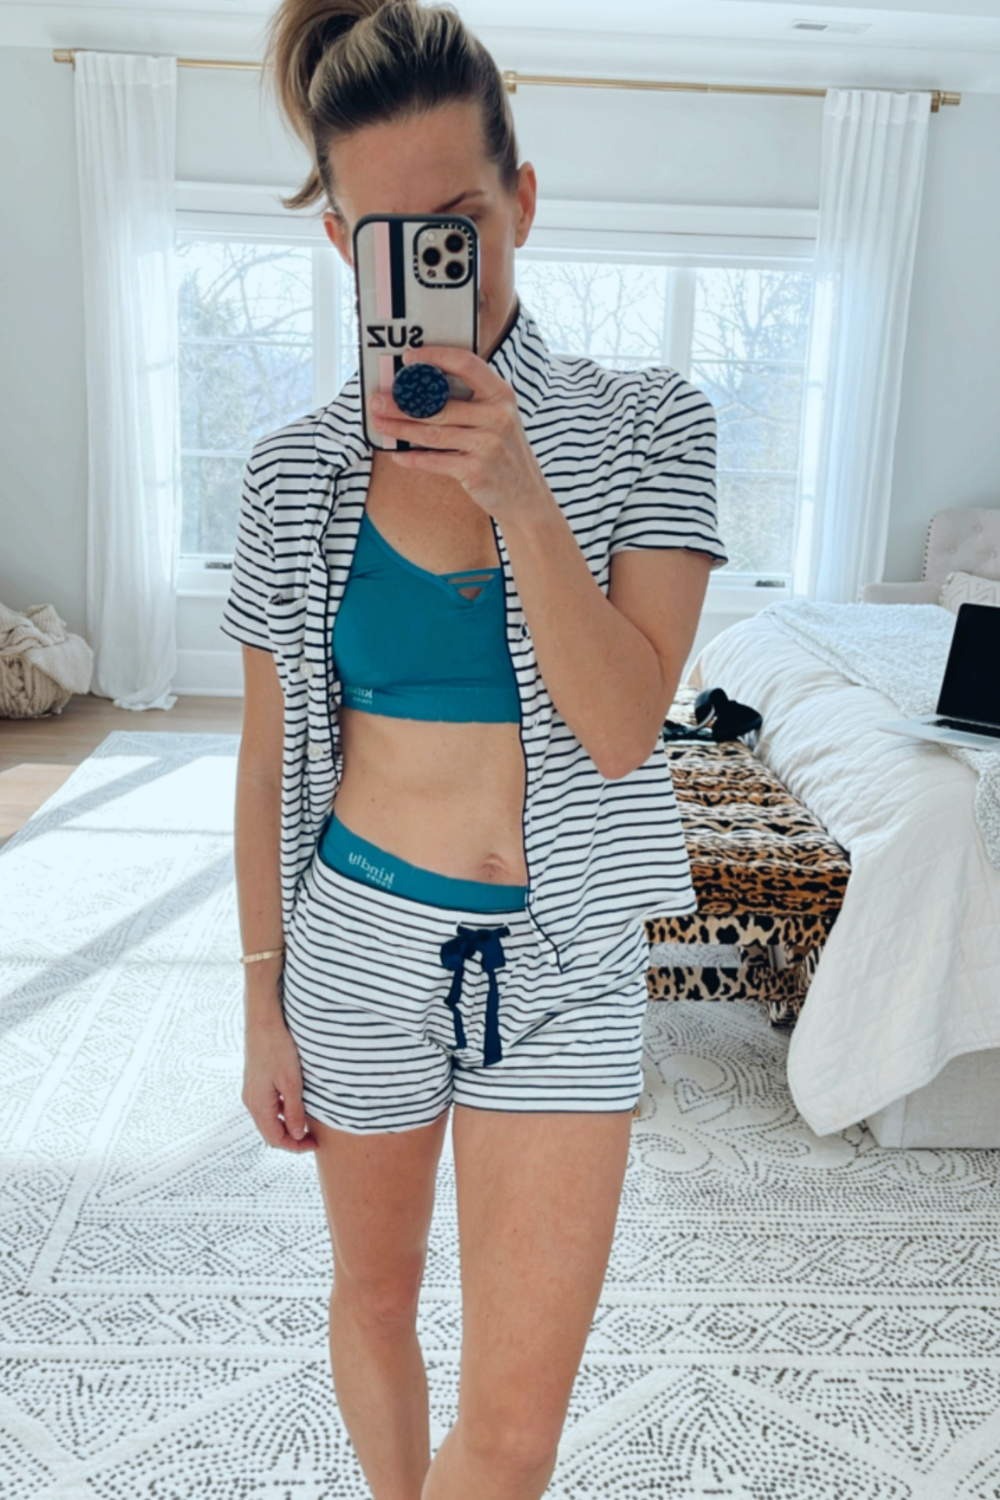 Suzanne taking a mirror selfie in a striped shorts pajama set and a Kindly sustainable bra and underwear set.